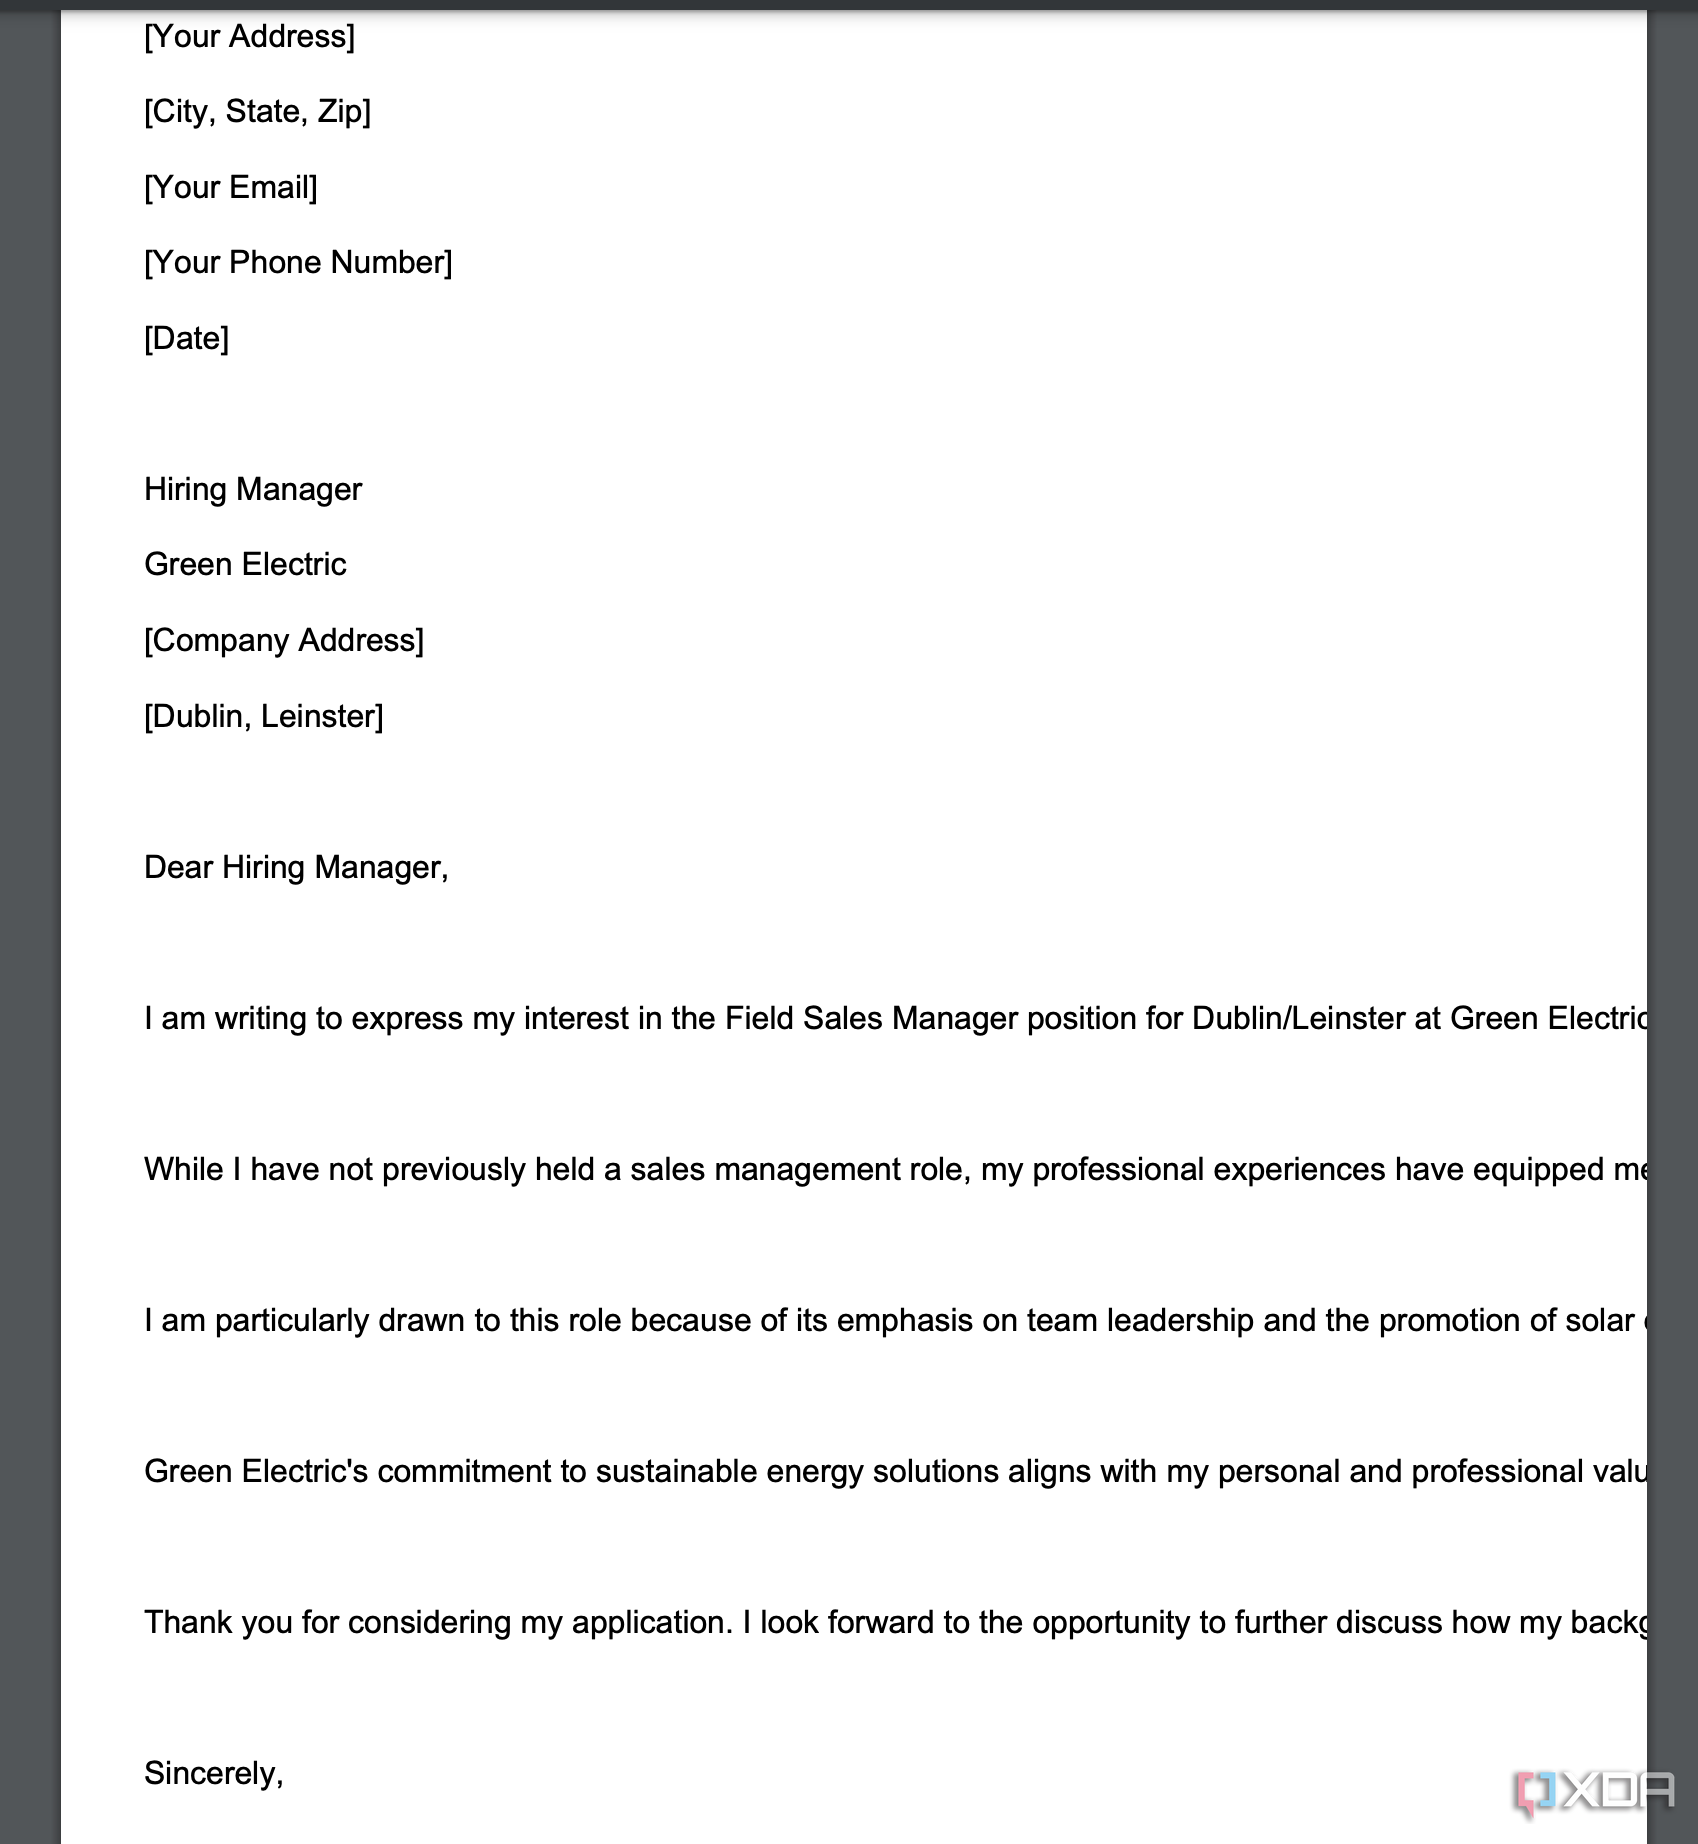 Cover letter in ChatGPT exported to PDF, showing text running off the side